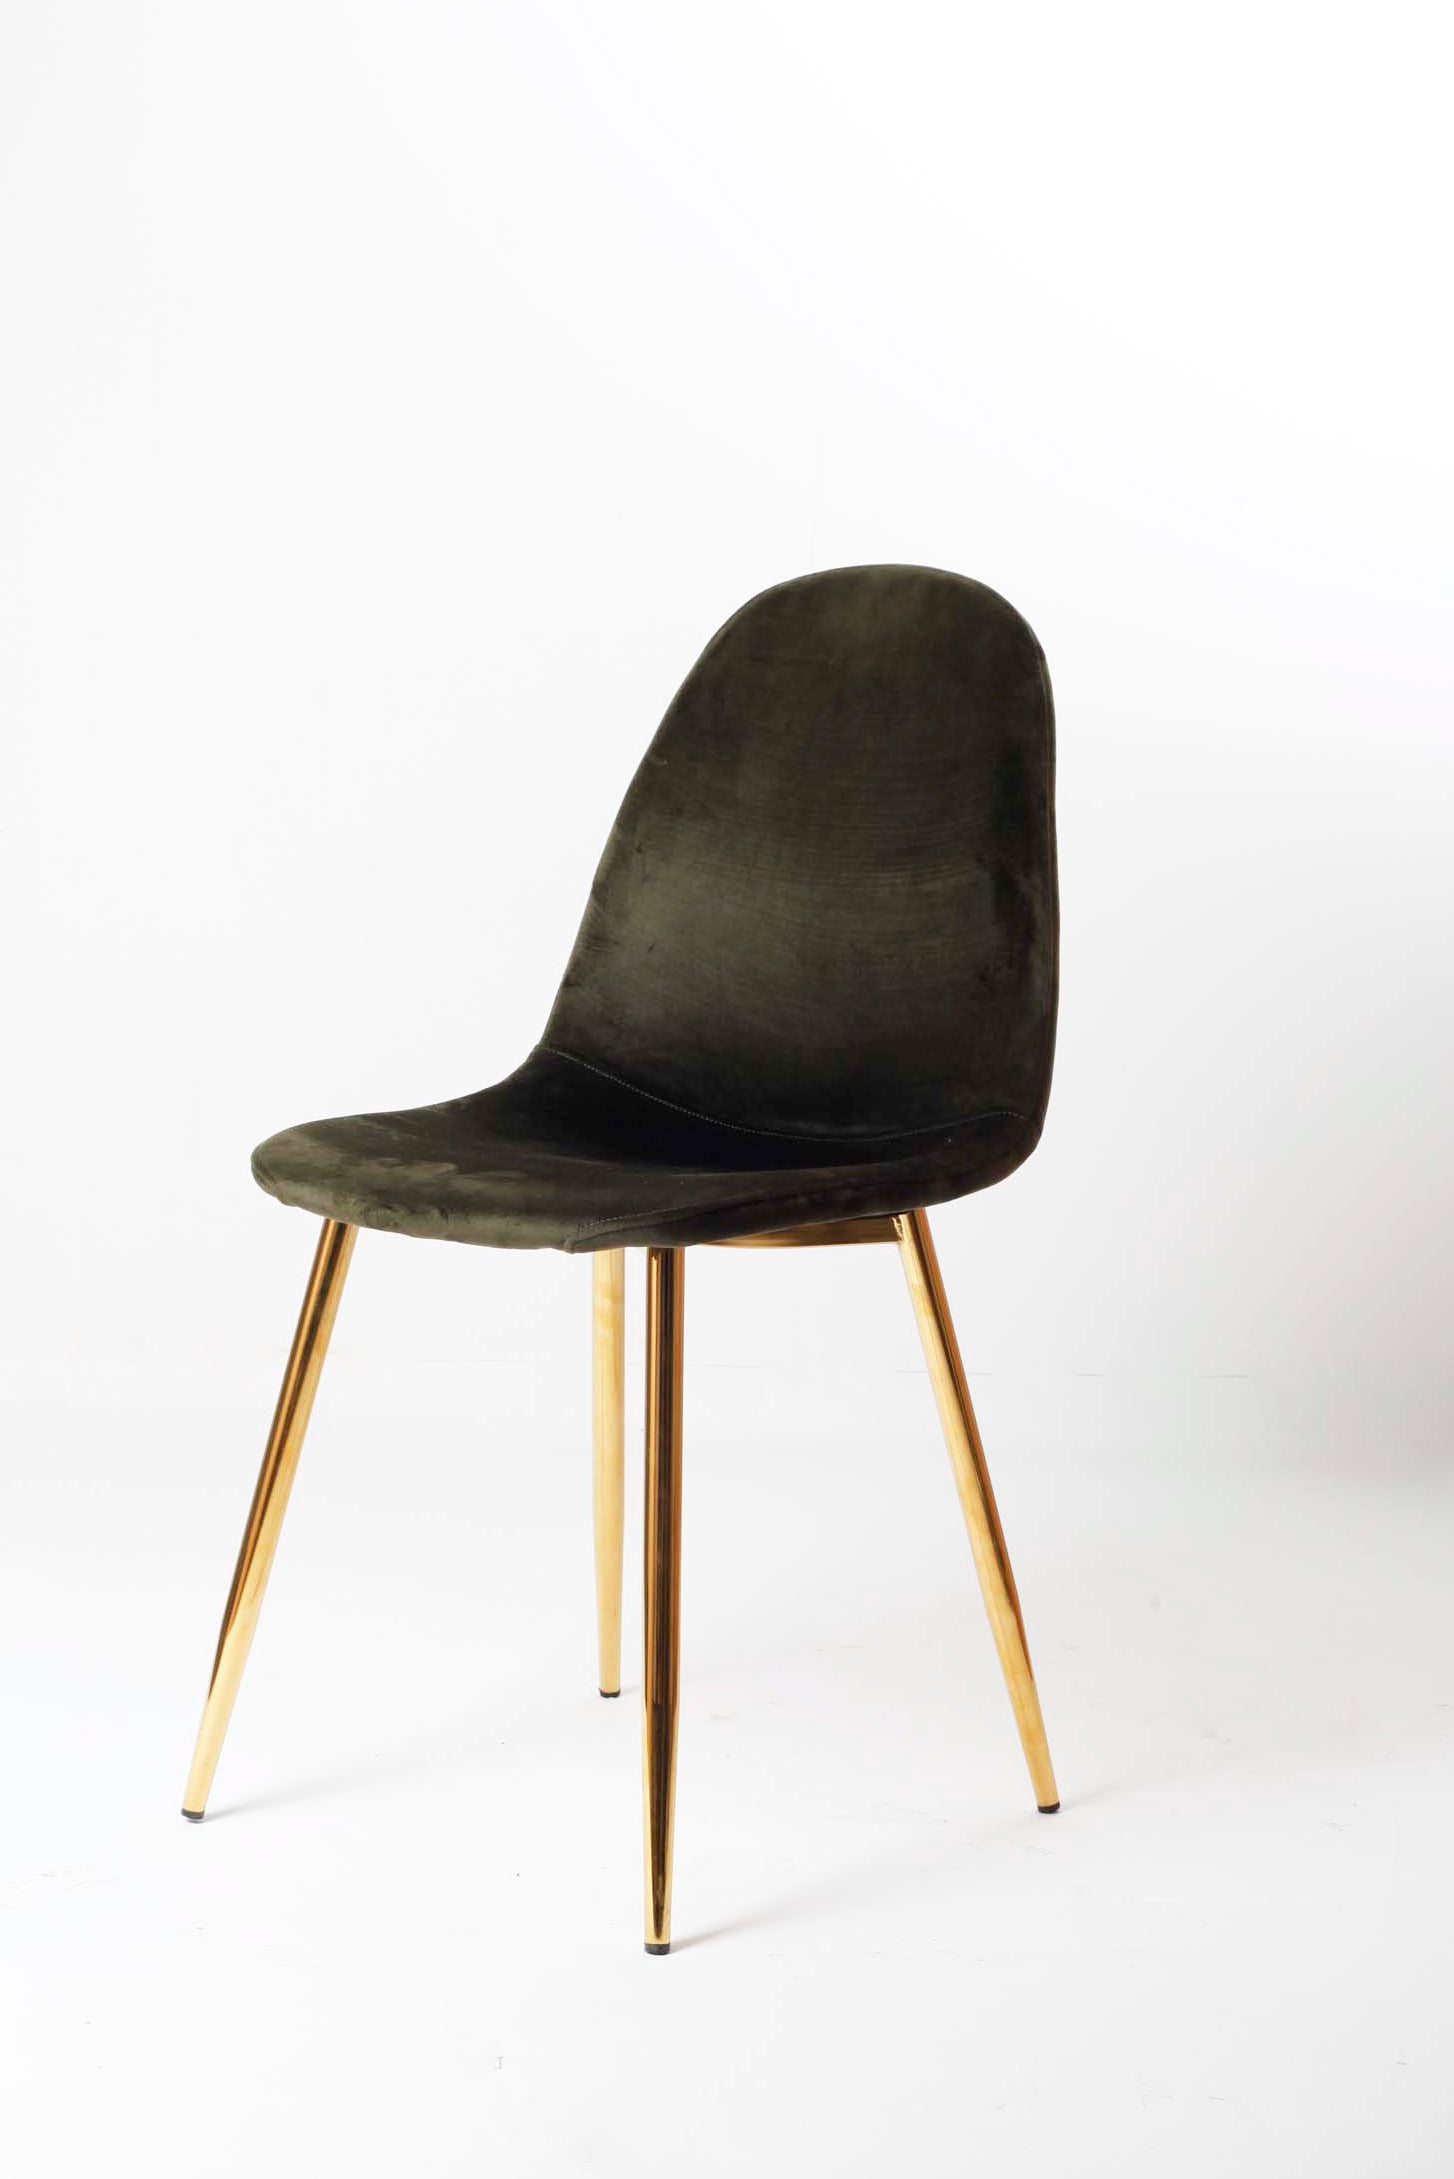 DARK GREEN SCANDINAVIAN STYLE VELVET DINING CHAIR WITH GOLD LEGS (4 pieces available)